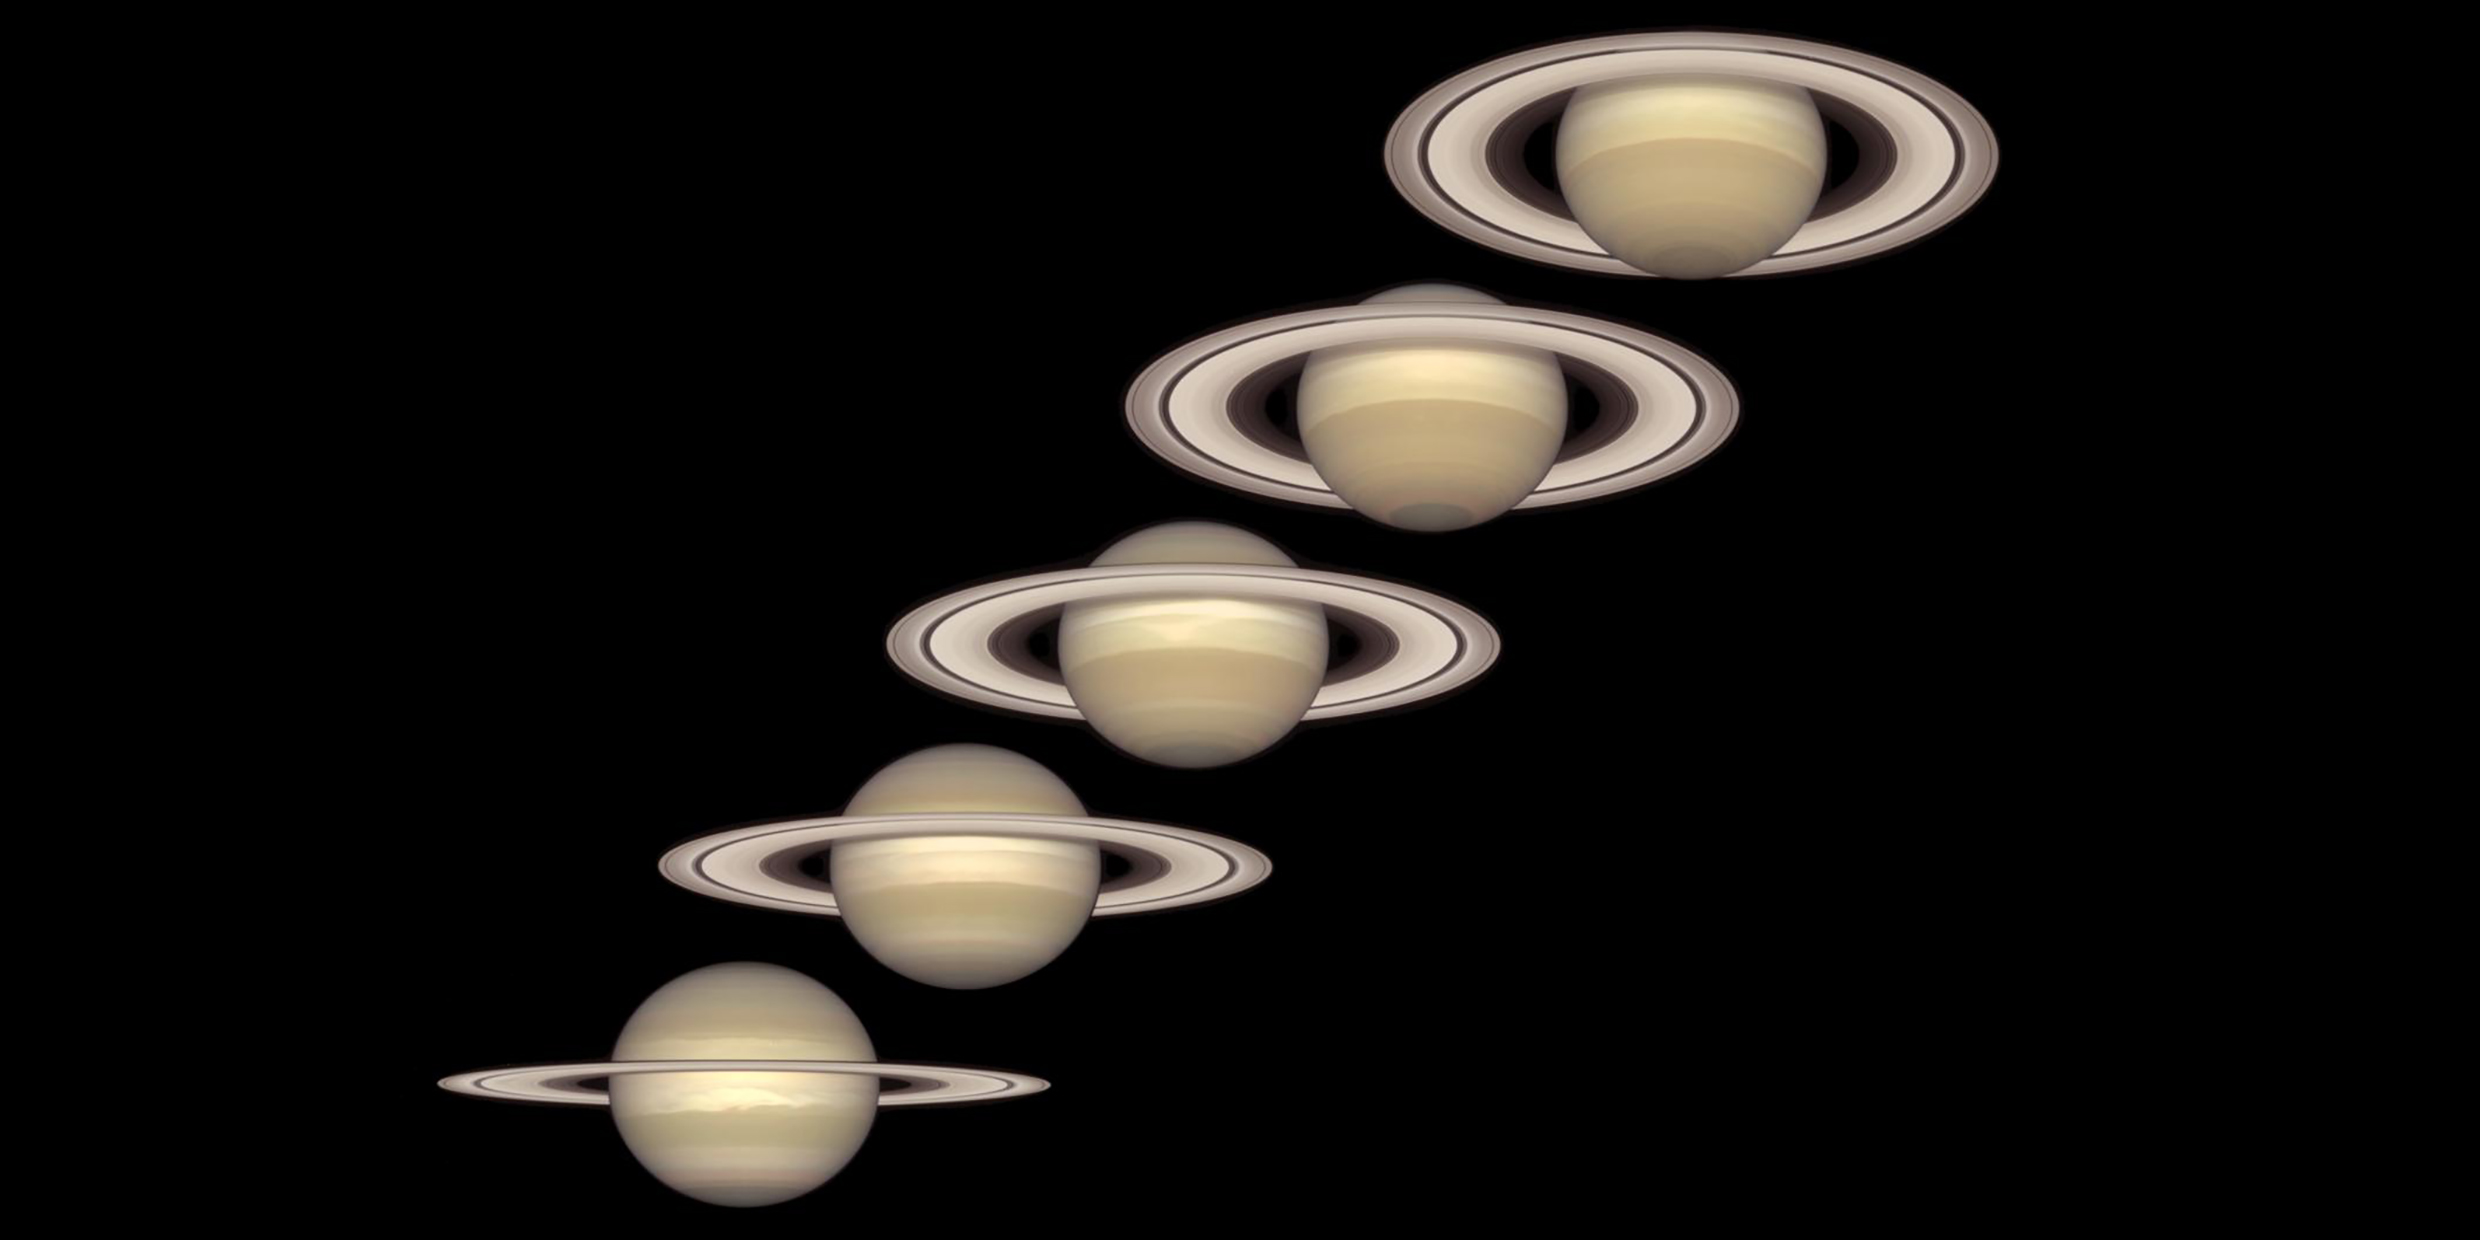 Composite image of Saturn's rings seen from different angles